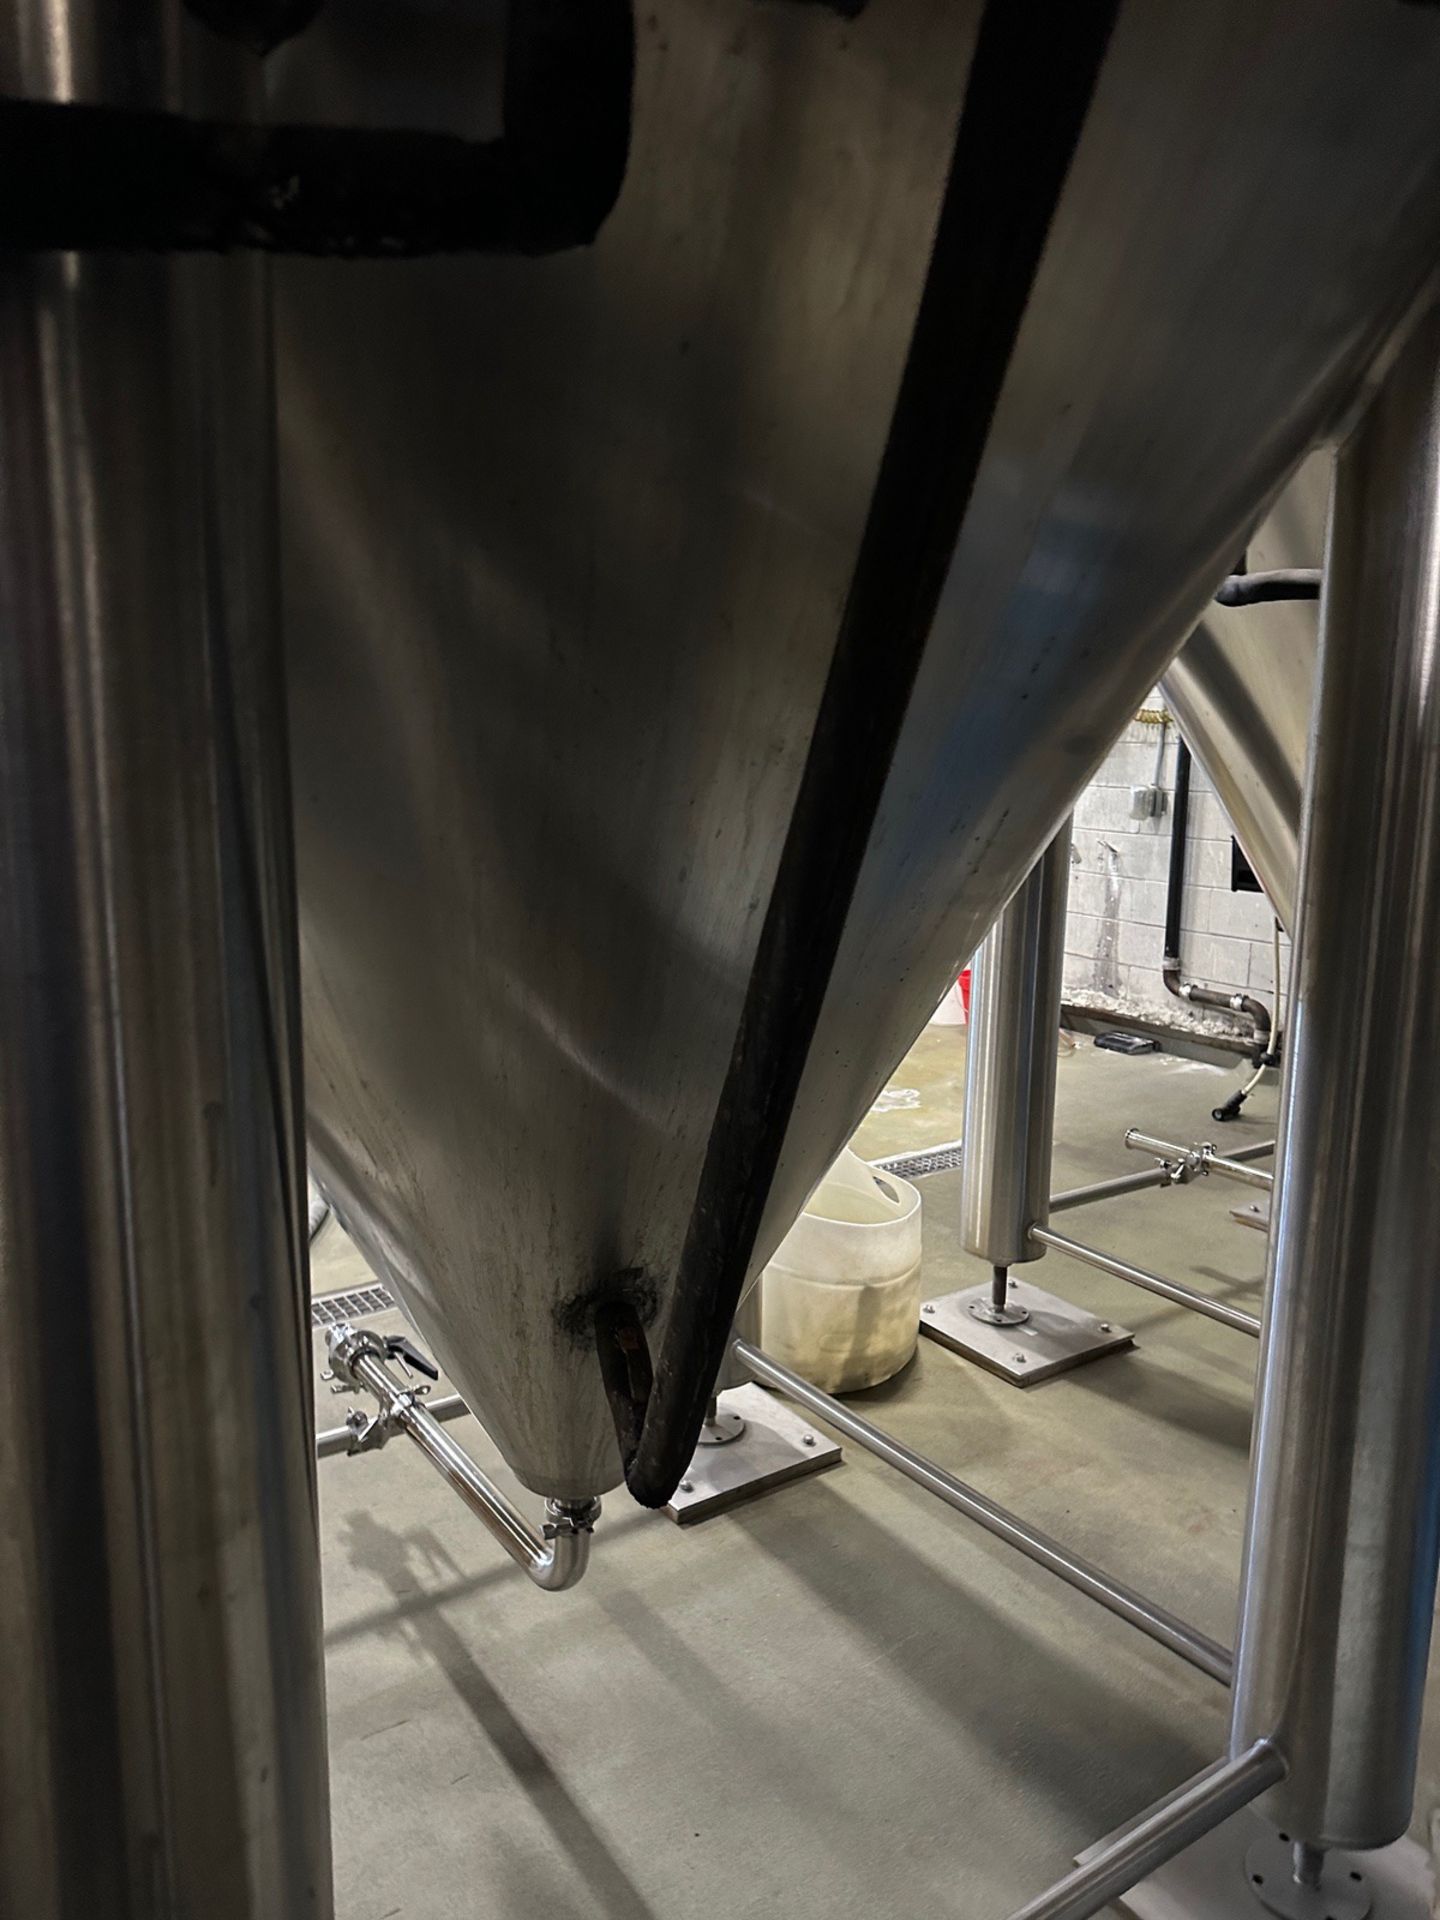 2018 Prospero SK 120 BBL Fermenter, Glycol Jacketed, Approx 7ft ID x 24ft OAH, S/N: 18102759 - Image 6 of 6